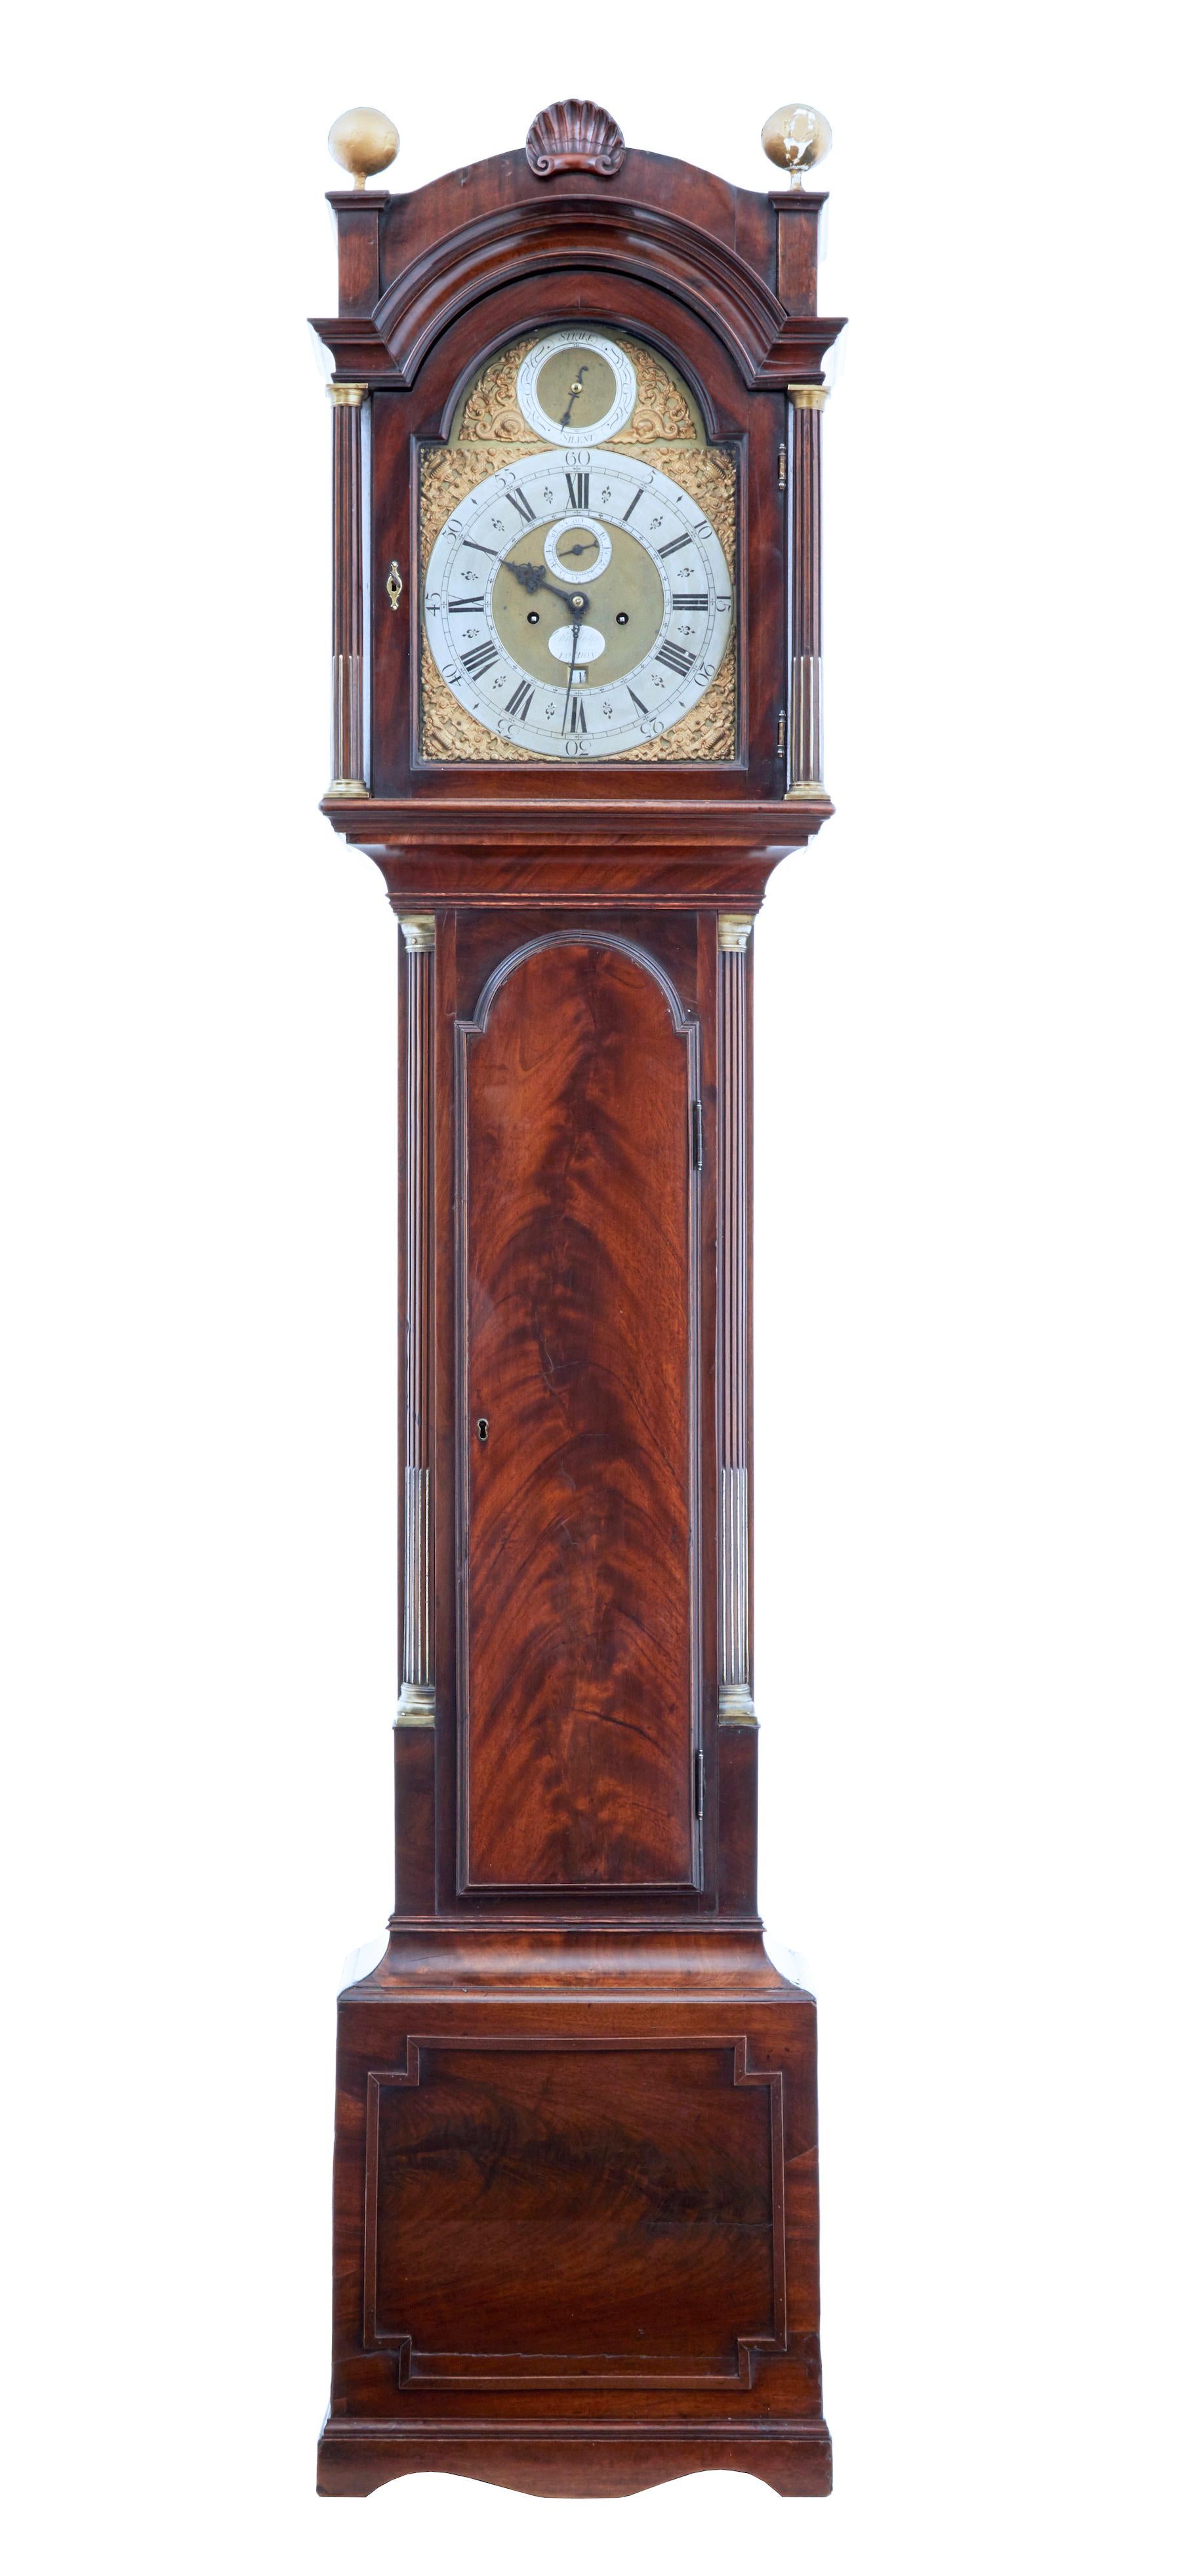 Georgian long case clock in mahogany, circa 1790. Movement made and signed by the well known movement maker John Purden of London. Movement with roman and Arabic numerals. Movement has been professionally service. Hood with glazed door for winding.